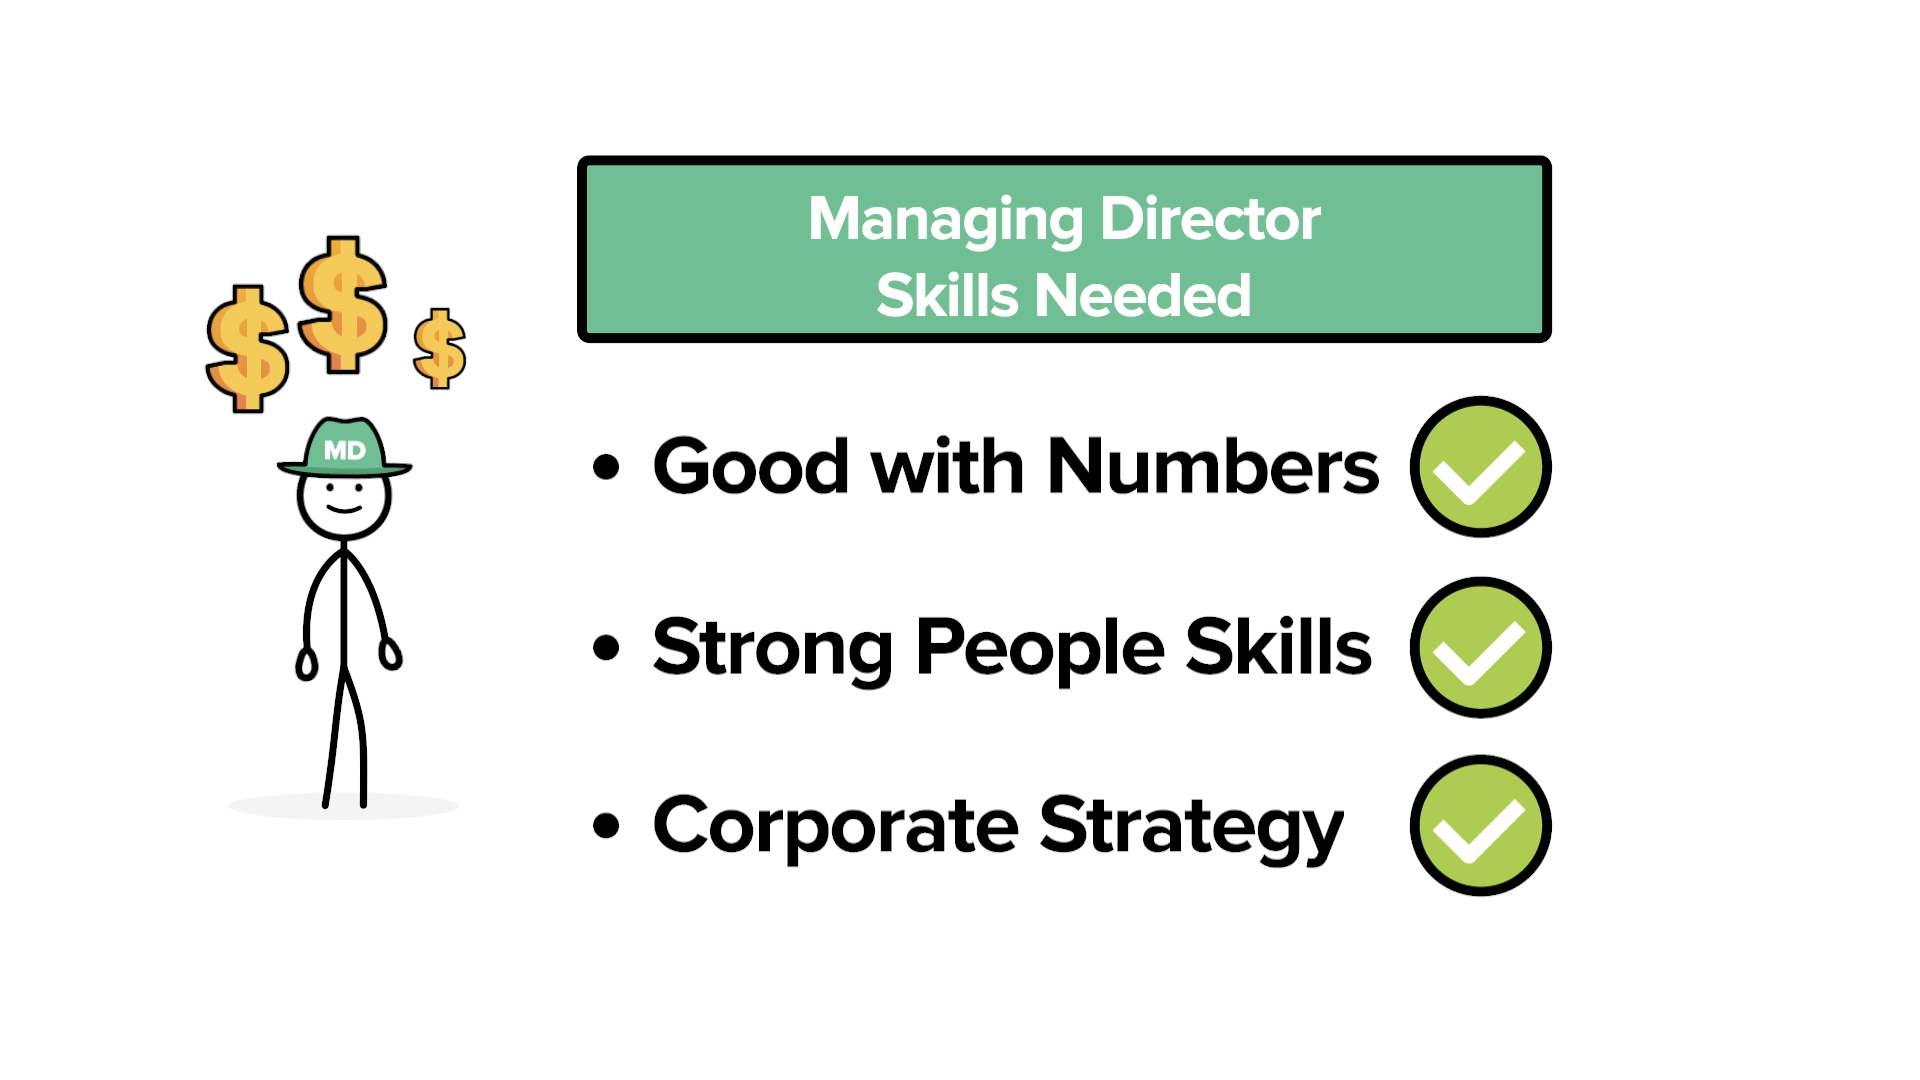 An image showing the key success factors needed to succeed as a Managing Director in Investment Banking